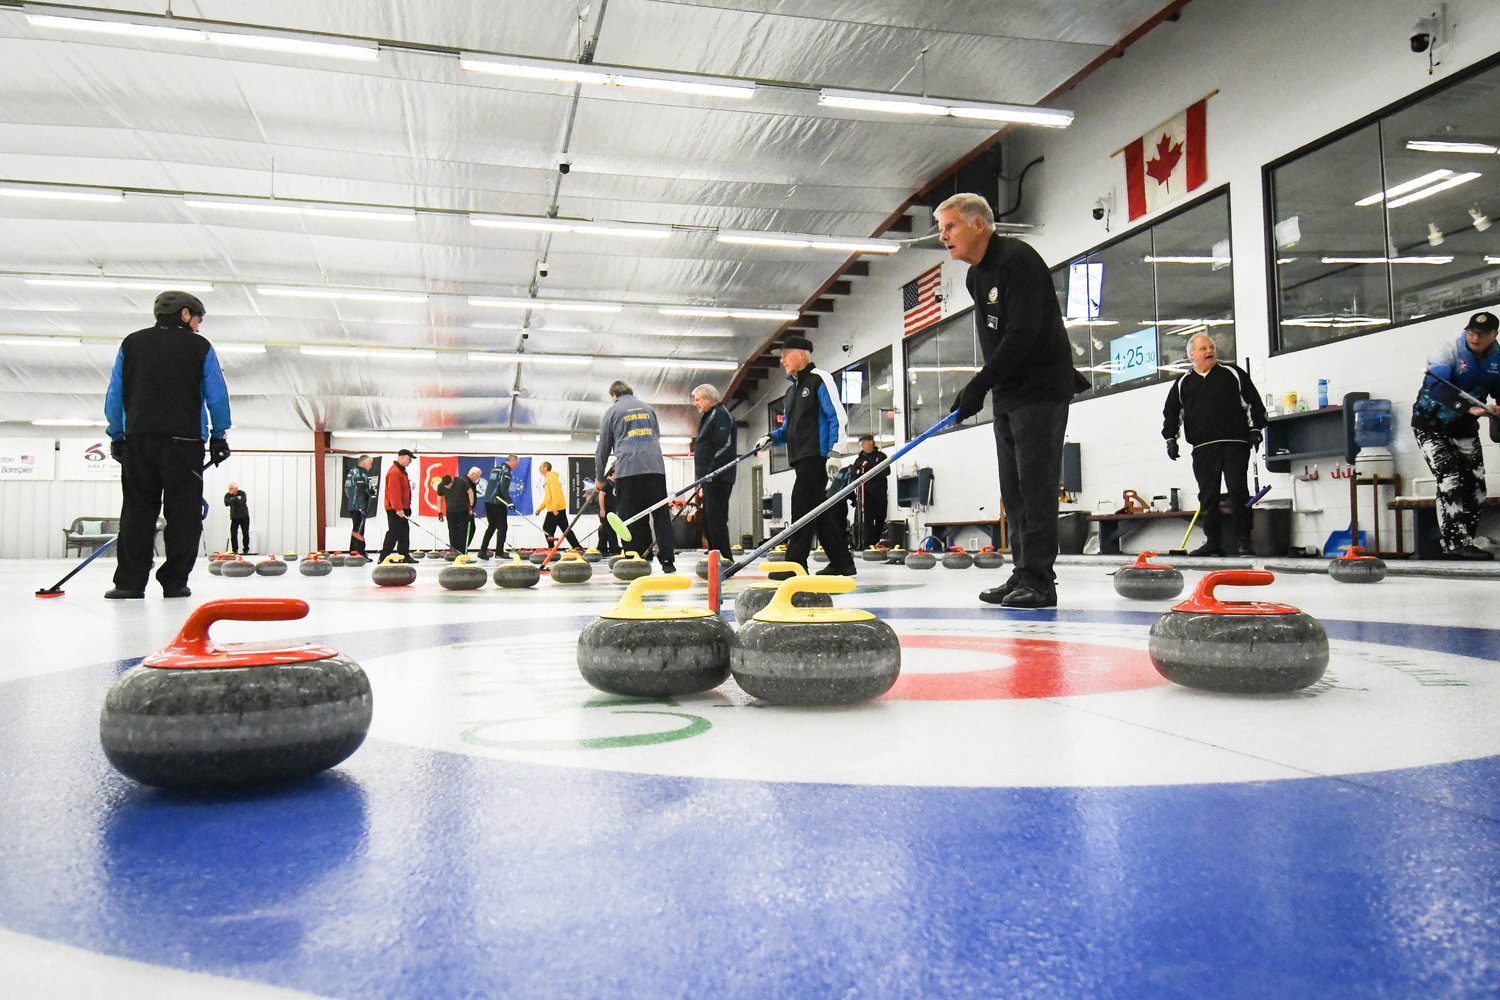 Teams compete in the 53rd annual Ross Tarlton International Bonspiel on Friday afternoon at the Utica Curling Club in Whitesboro.